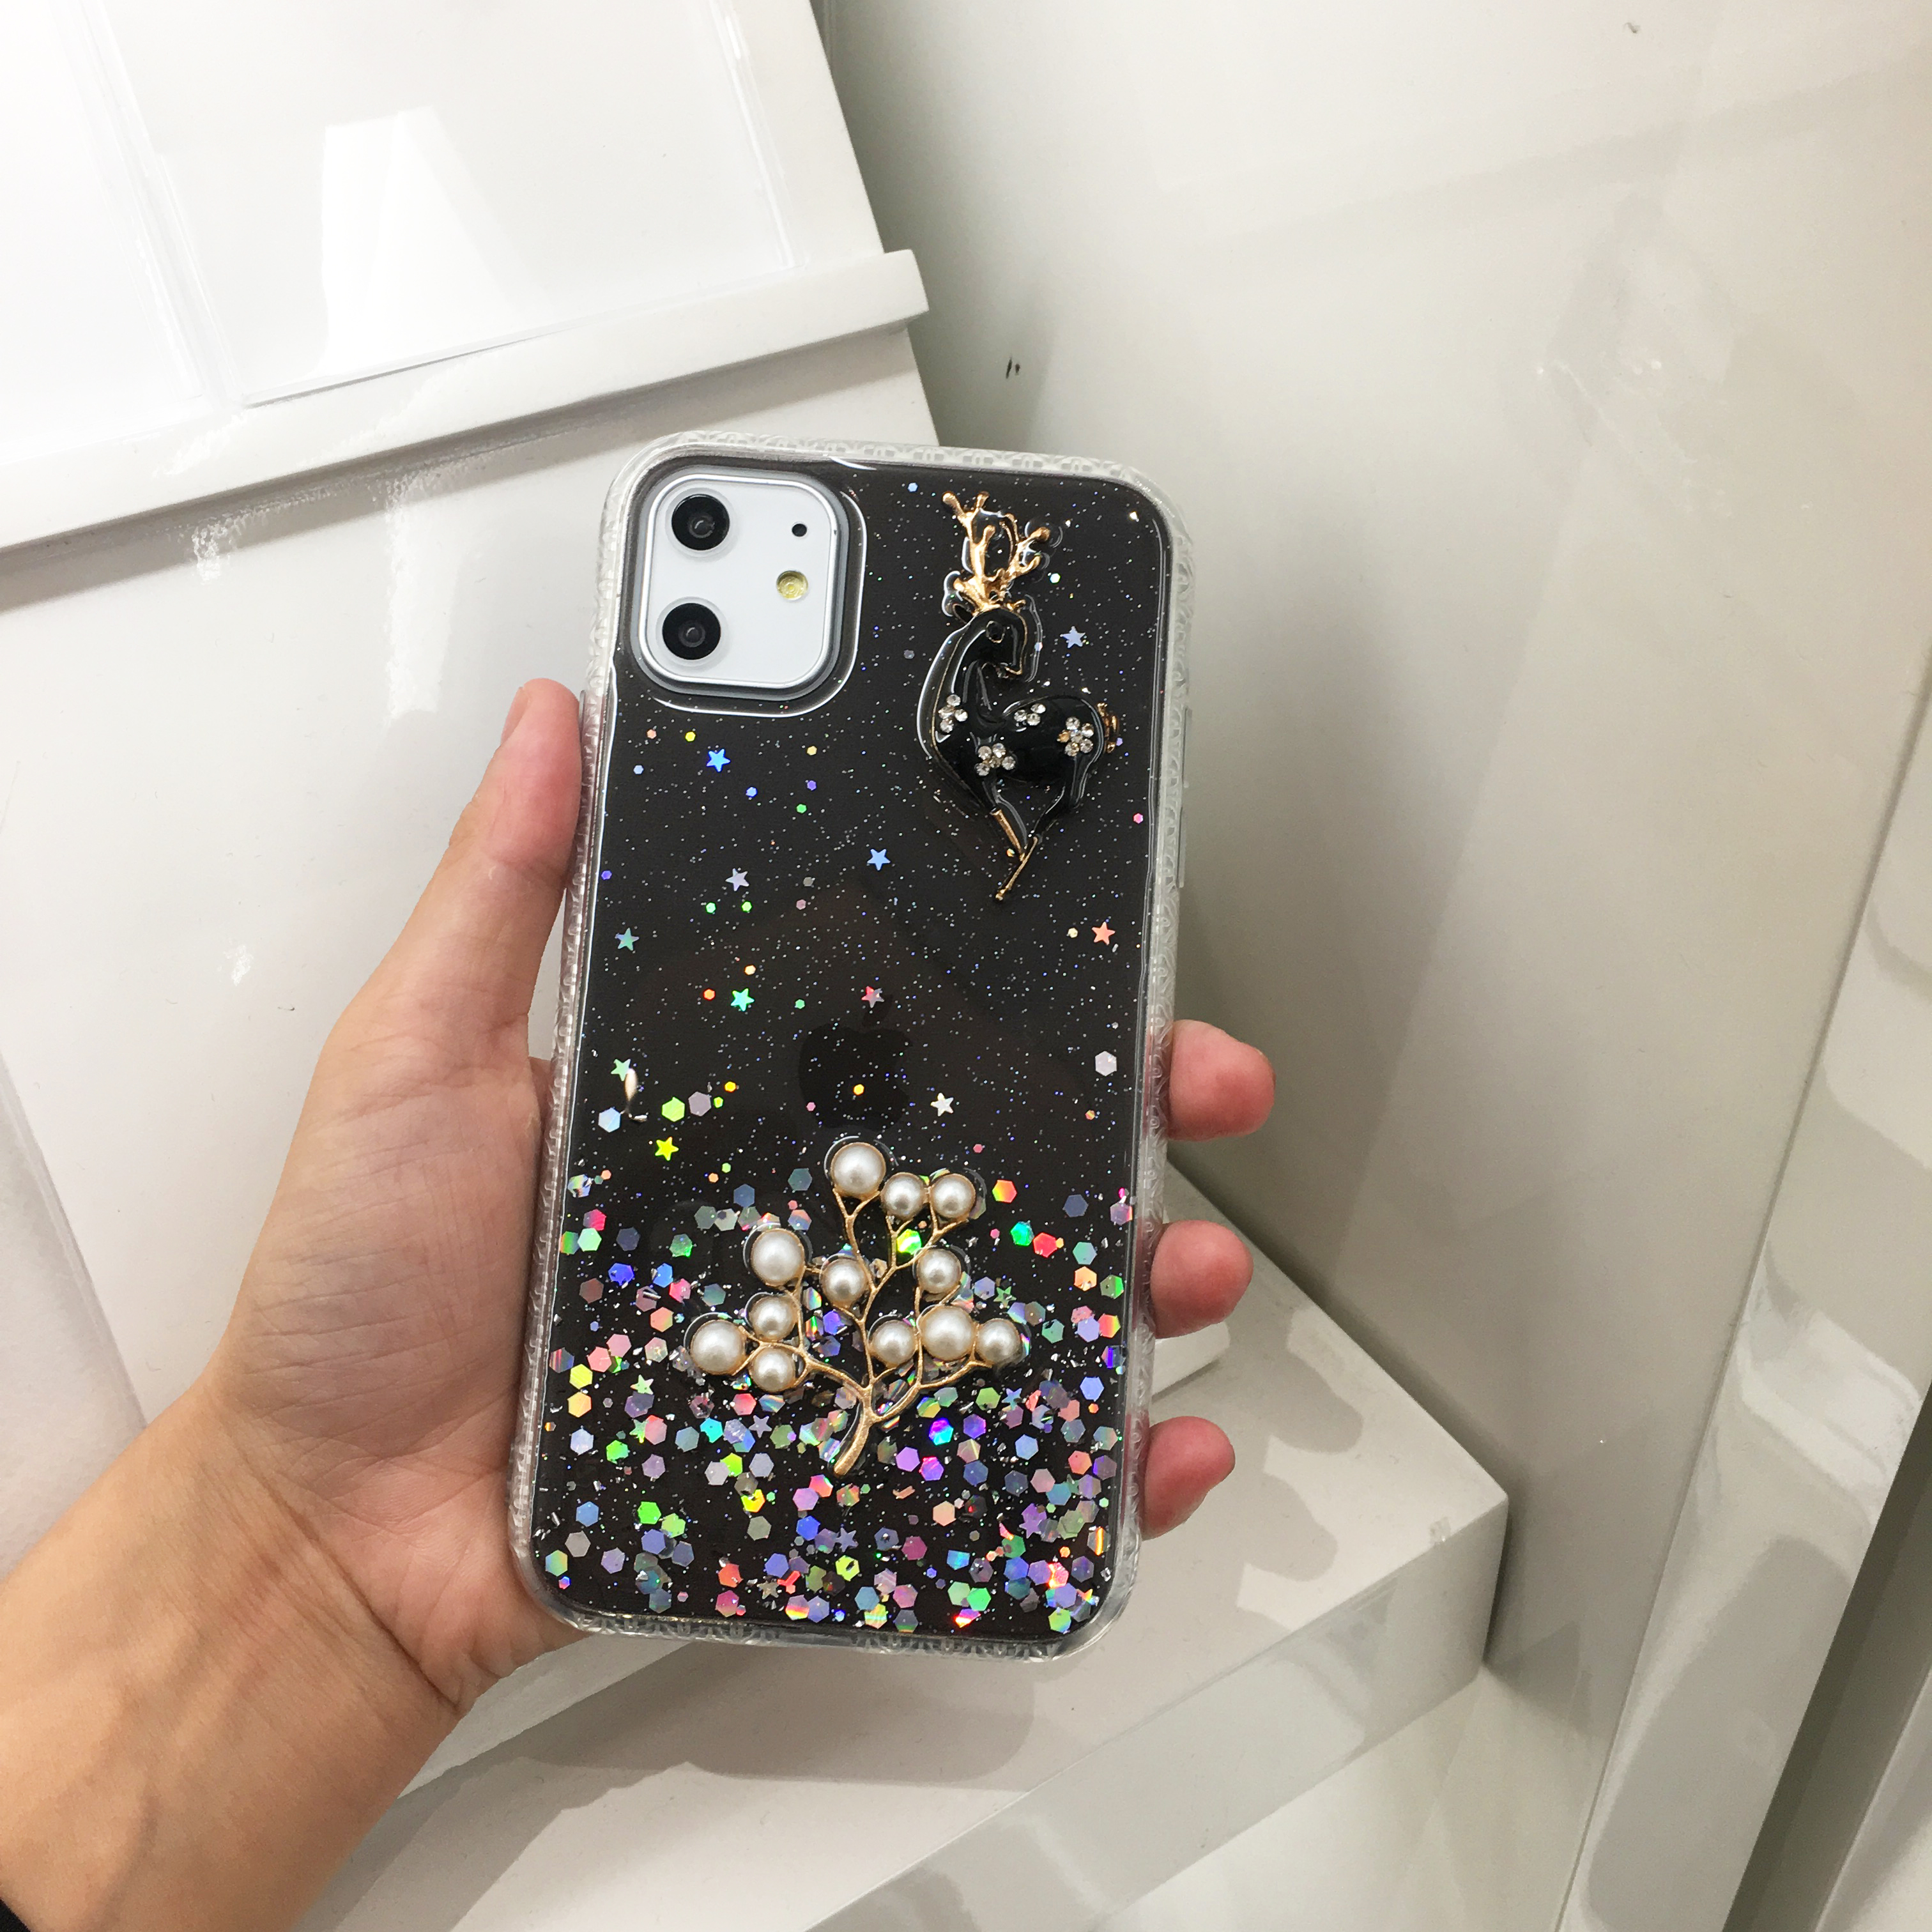 iPhone 11 Pro Max (6.5in) 3D Deer Crystal DIAMOND Shiny Case (Smoke)